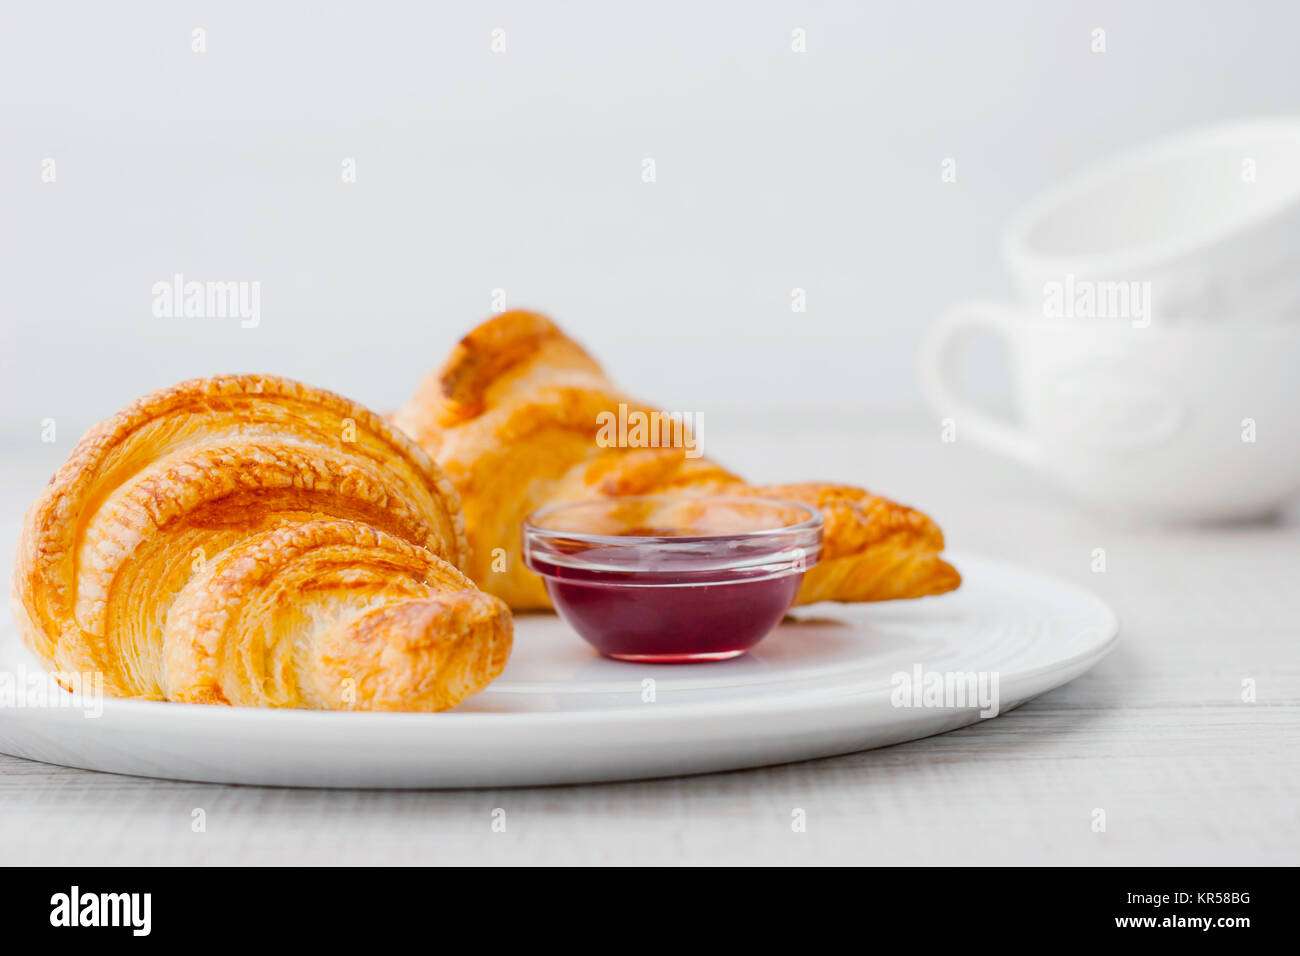 Croissants with berry jam and two white blurred cups horizontal Stock Photo